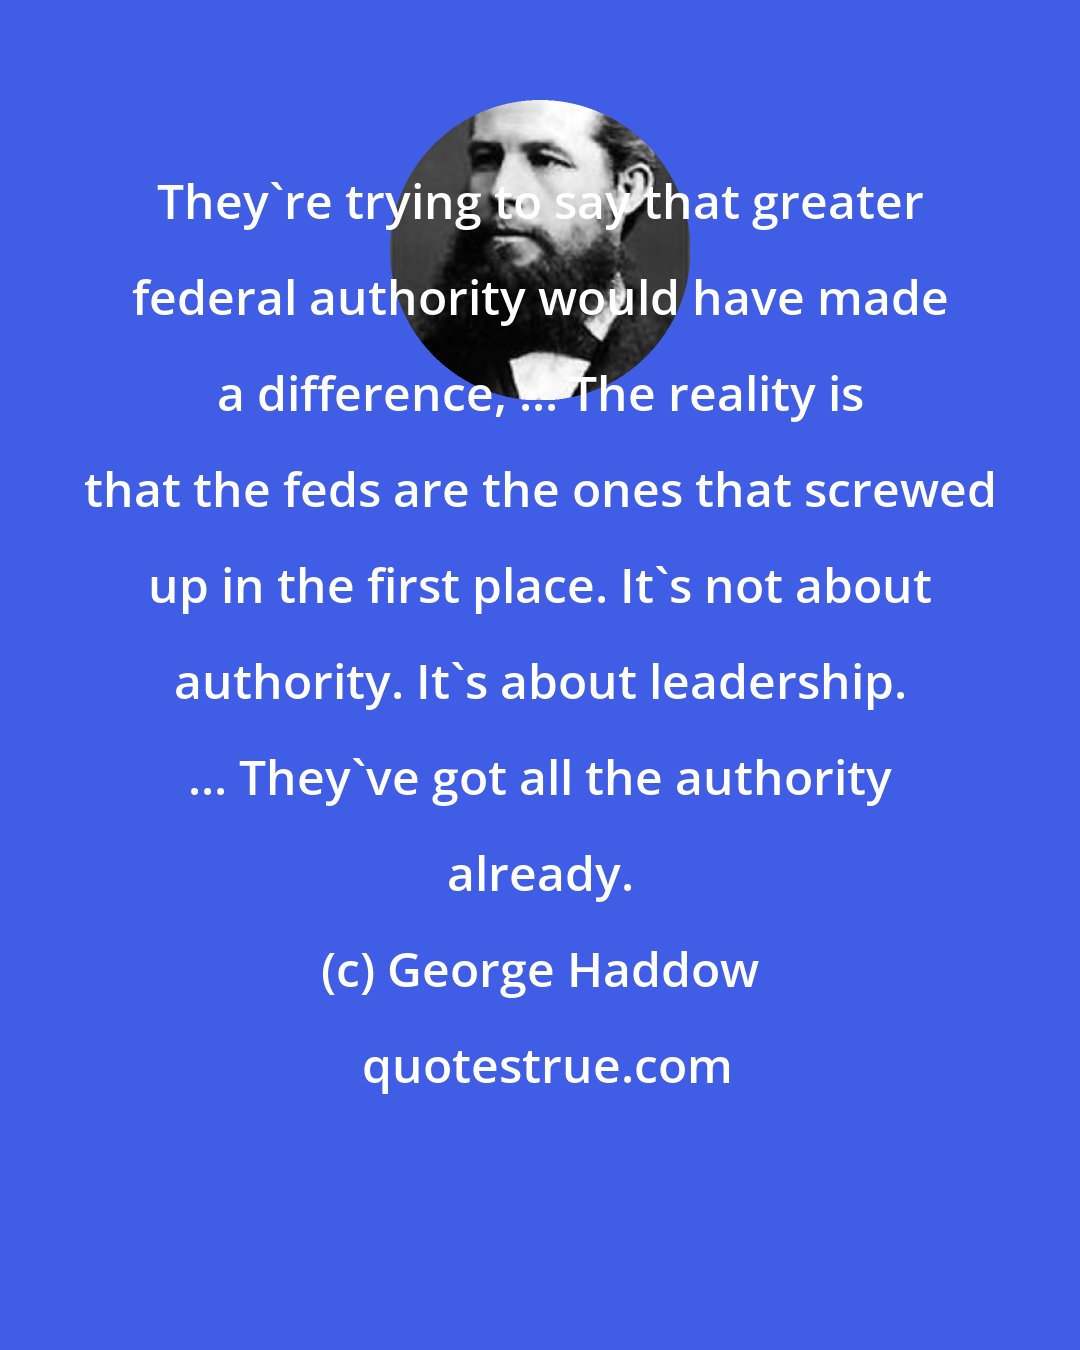 George Haddow: They're trying to say that greater federal authority would have made a difference, ... The reality is that the feds are the ones that screwed up in the first place. It's not about authority. It's about leadership. ... They've got all the authority already.